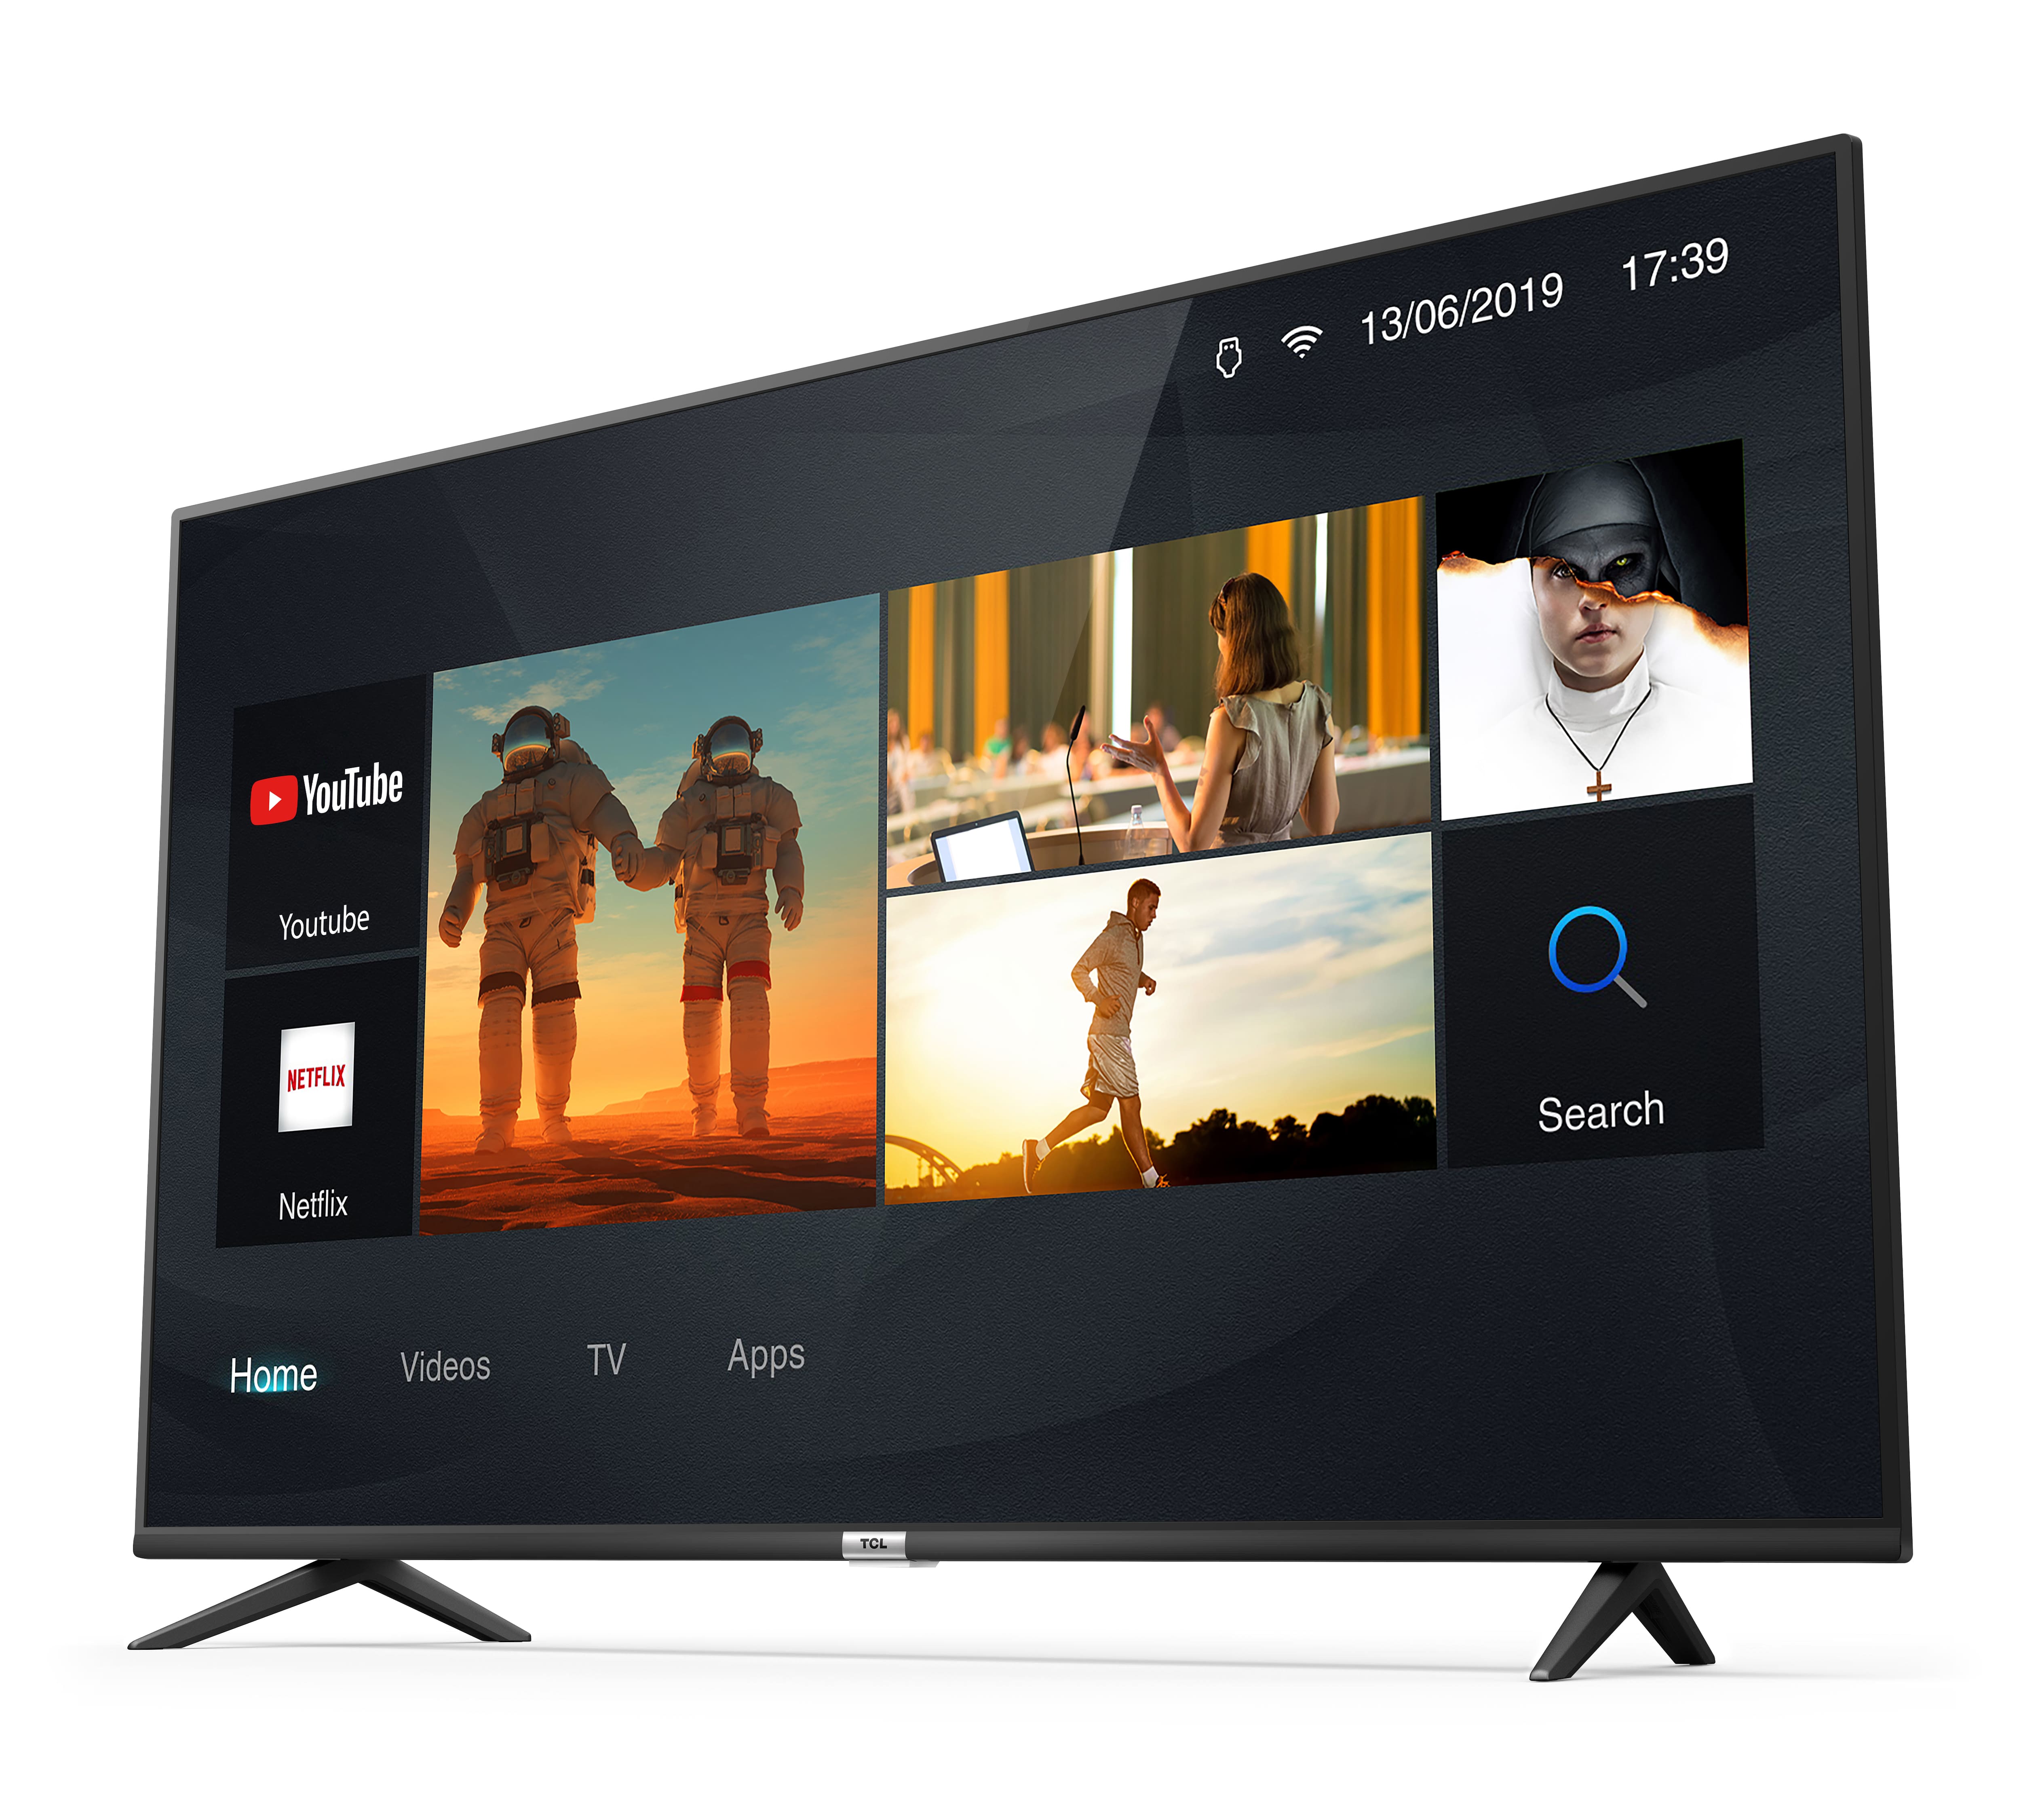 tcl-led-tv-32-32s6200-hd-android-tv-65589_44066.jpg